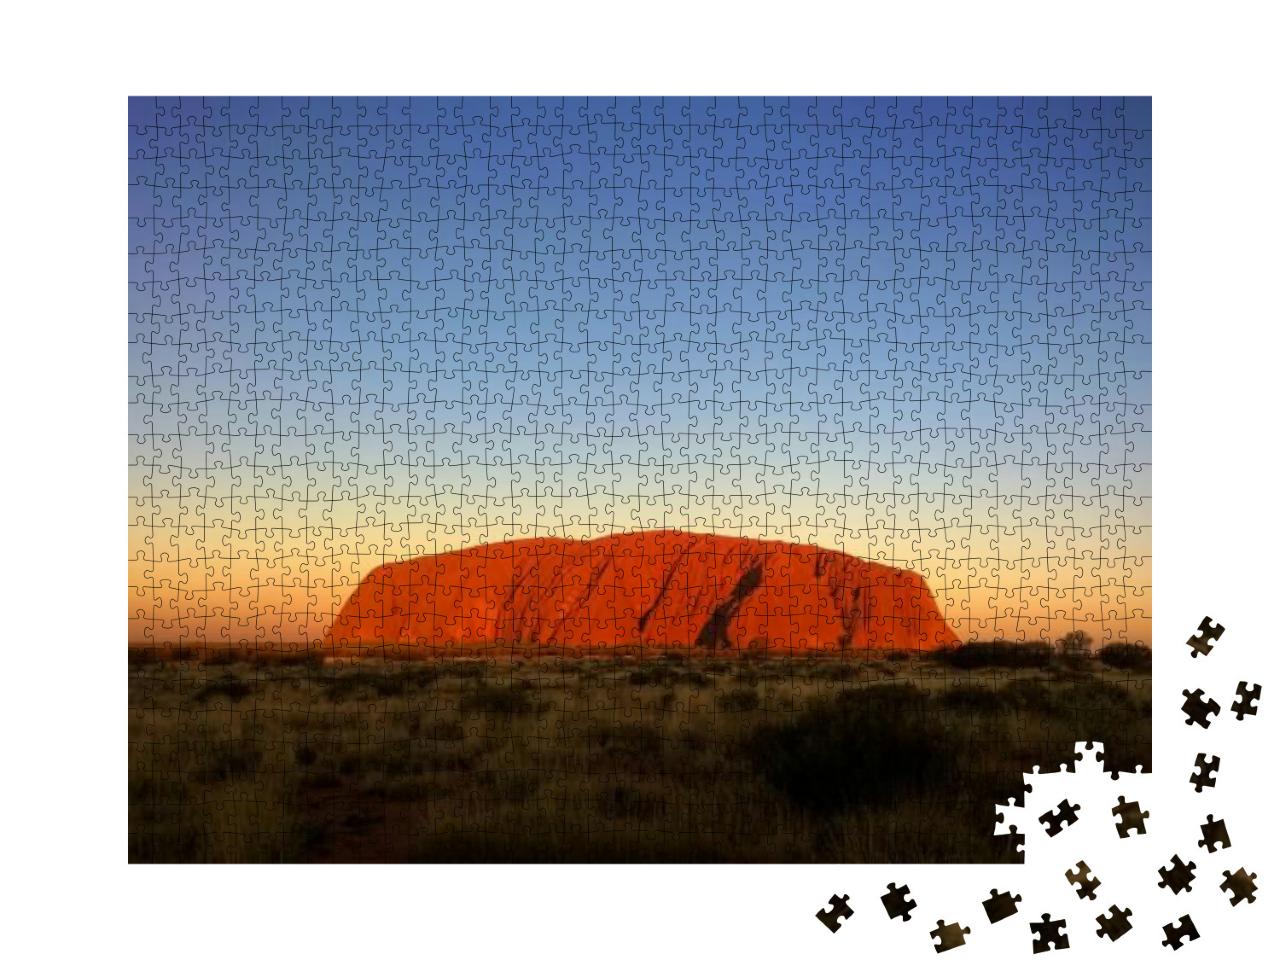 Uluru Ayers Rock by Sunset. Evening Dark Blue Sky with Na... Jigsaw Puzzle with 1000 pieces